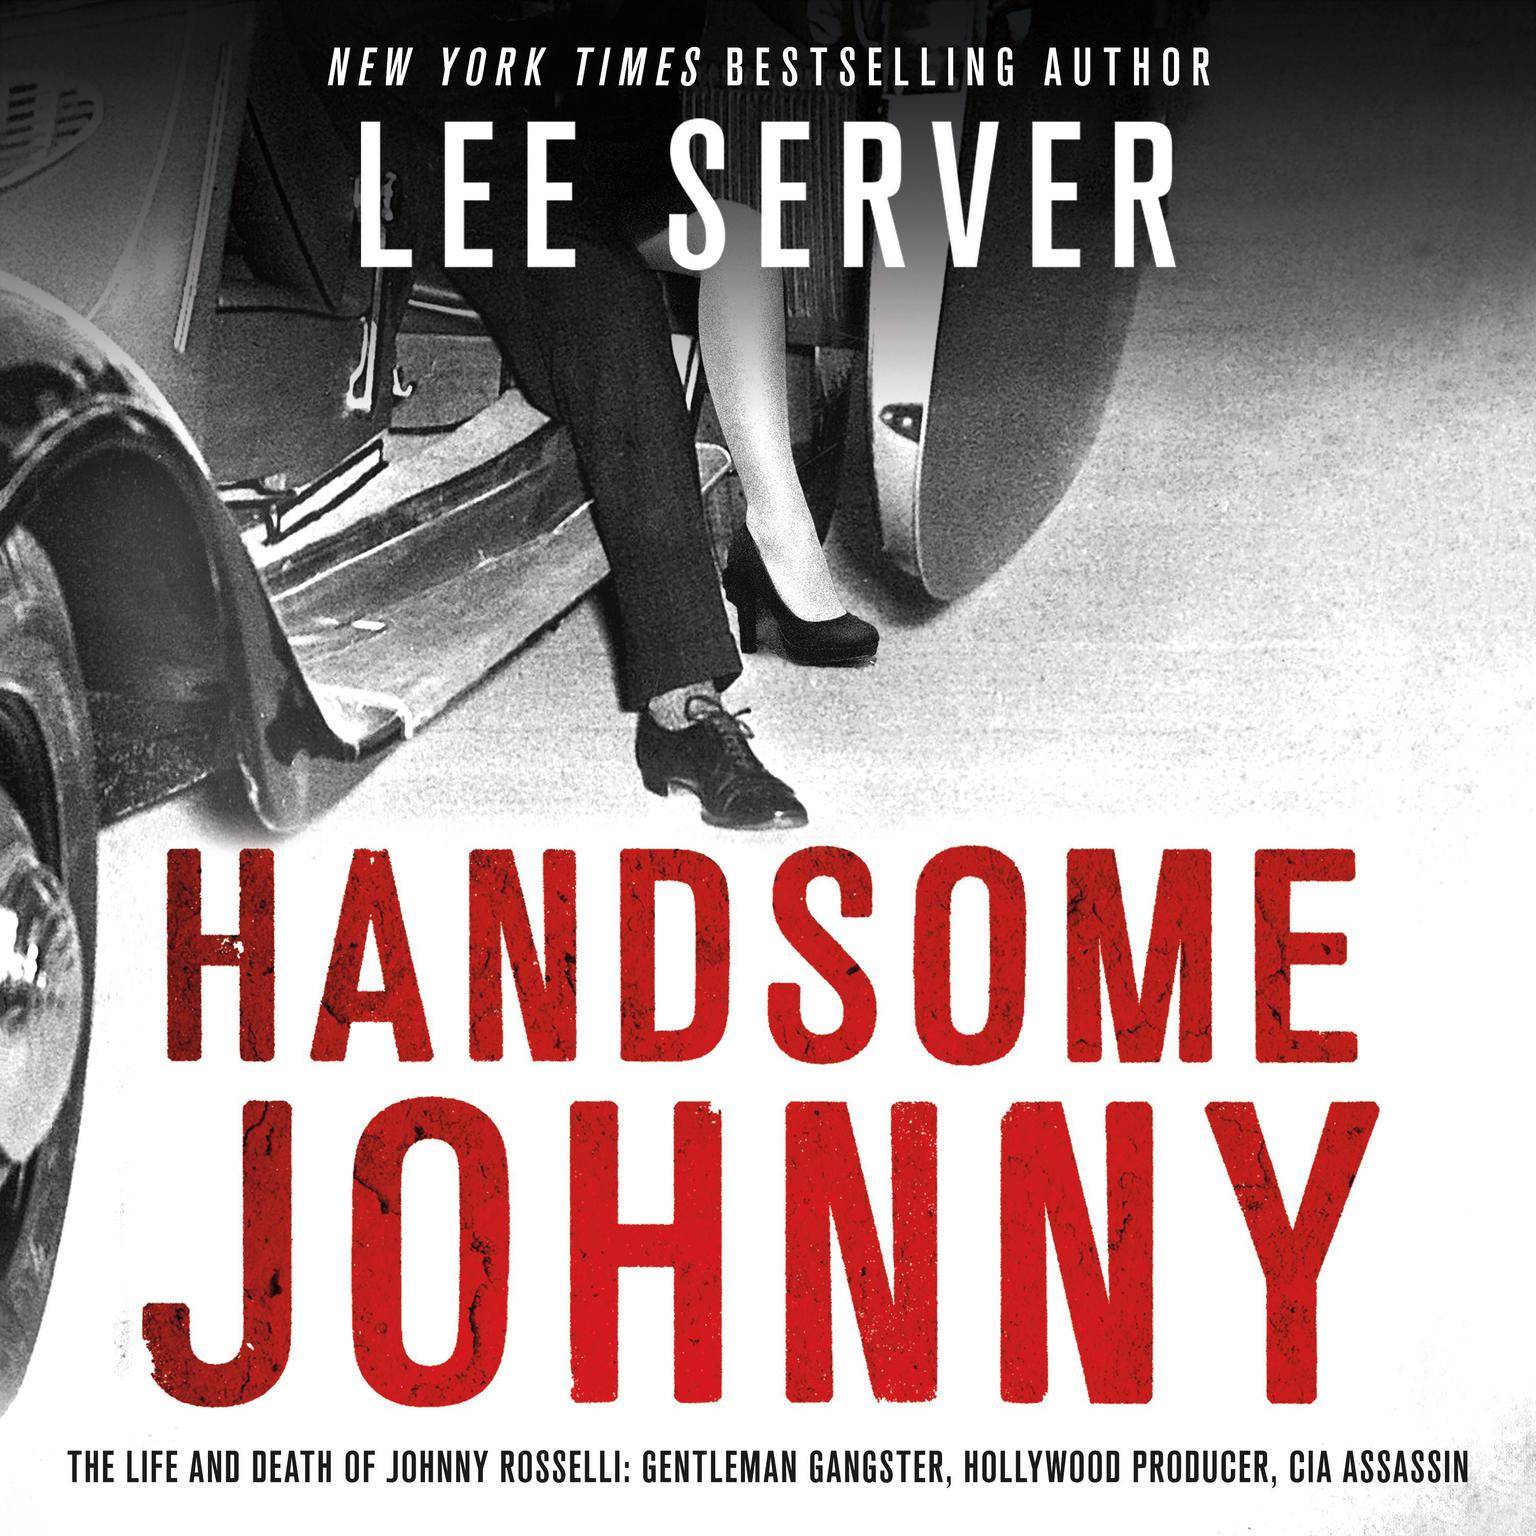 Handsome Johnny: The Life and Death of Johnny Rosselli: Gentleman Gangster, Hollywood Producer, CIA Assassin Audiobook, by Lee Server